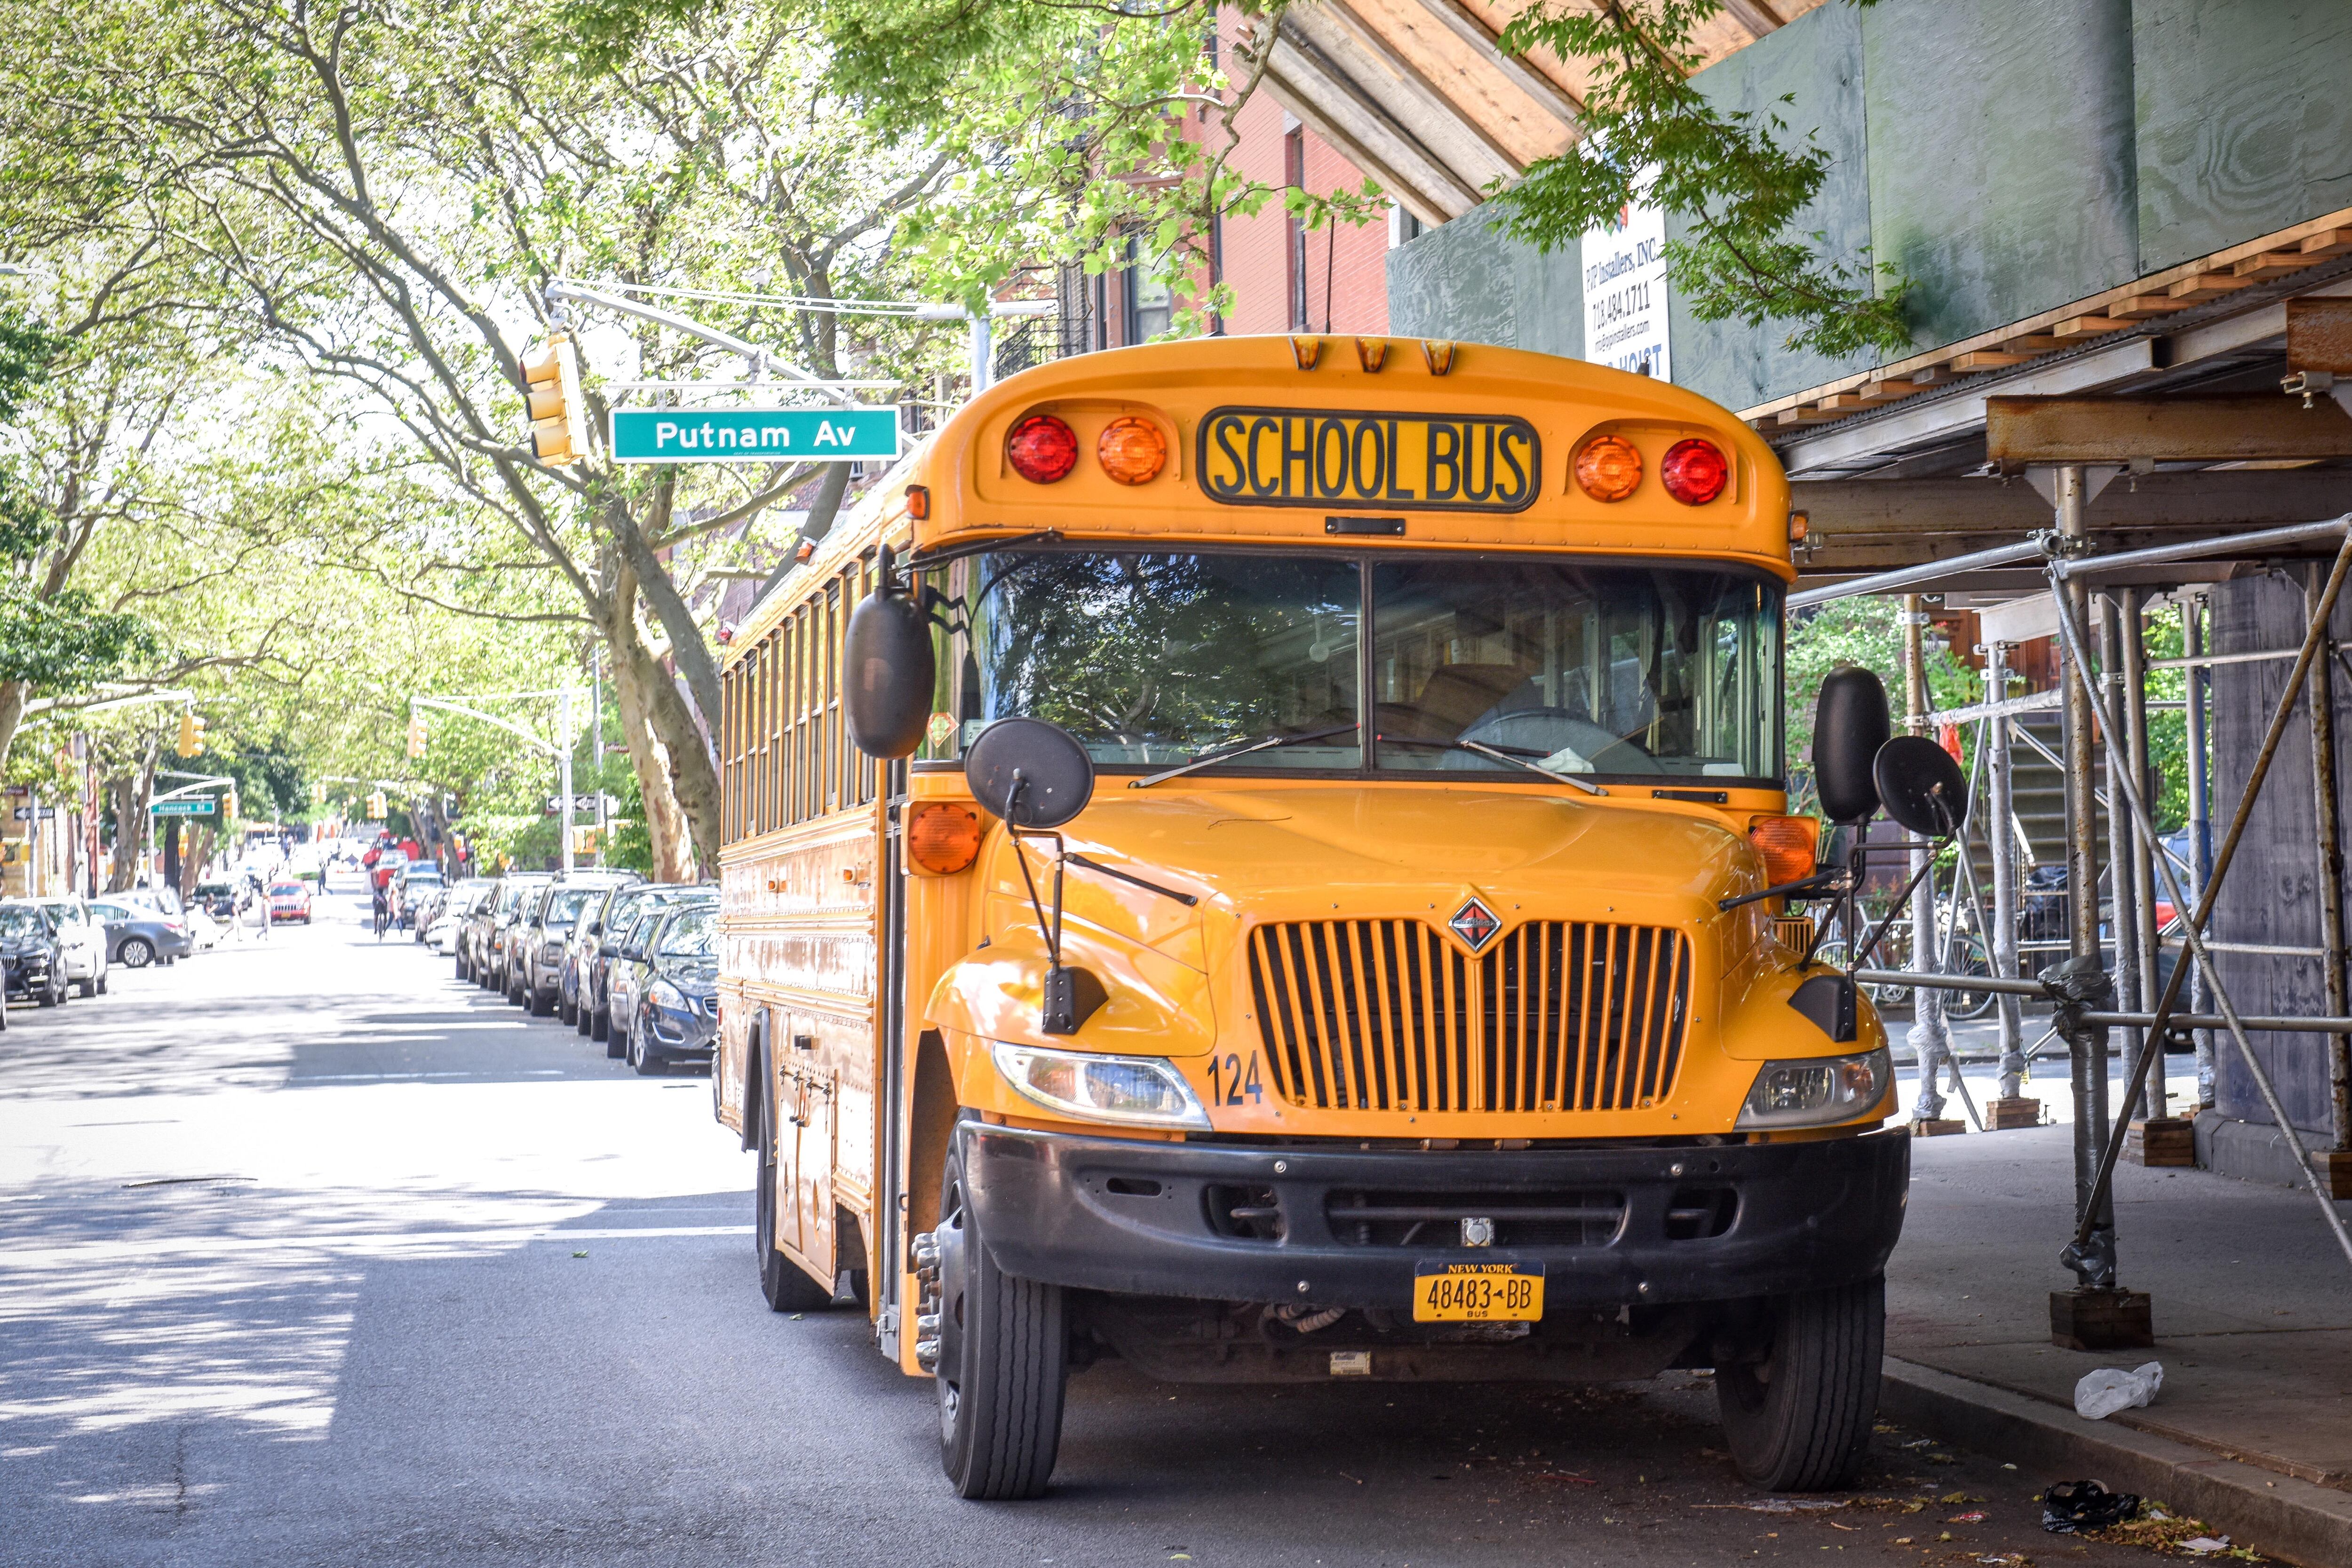 A yellow school bus is parked on the side of a street with scaffolding and buildings in the background.